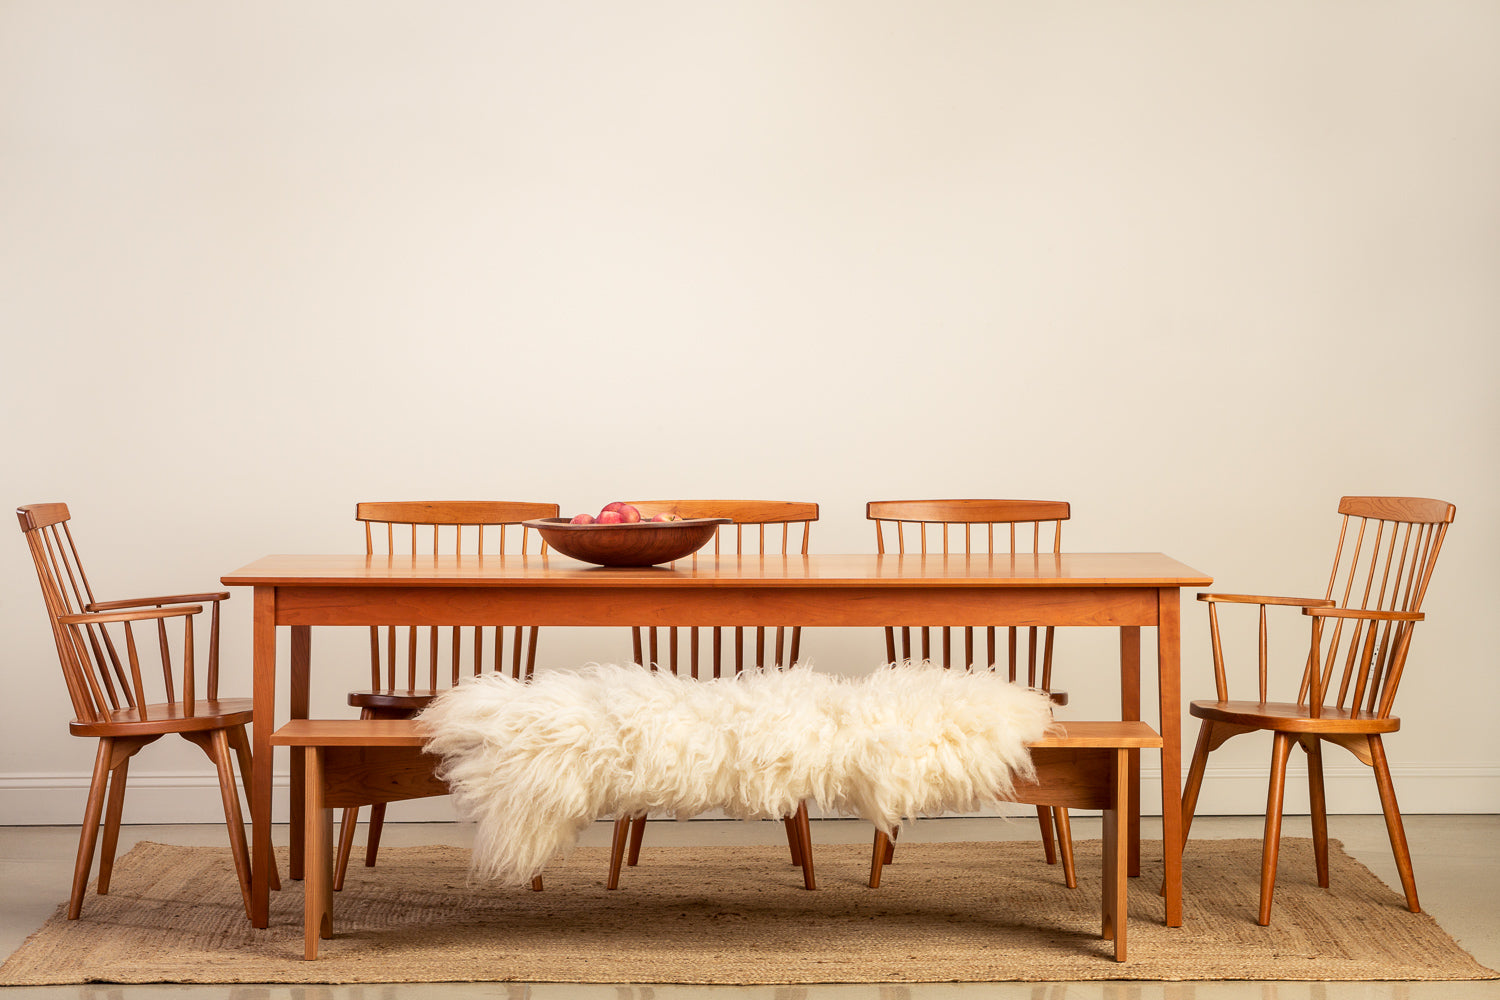 Solid wood dining set with white sheepskin throw on bench